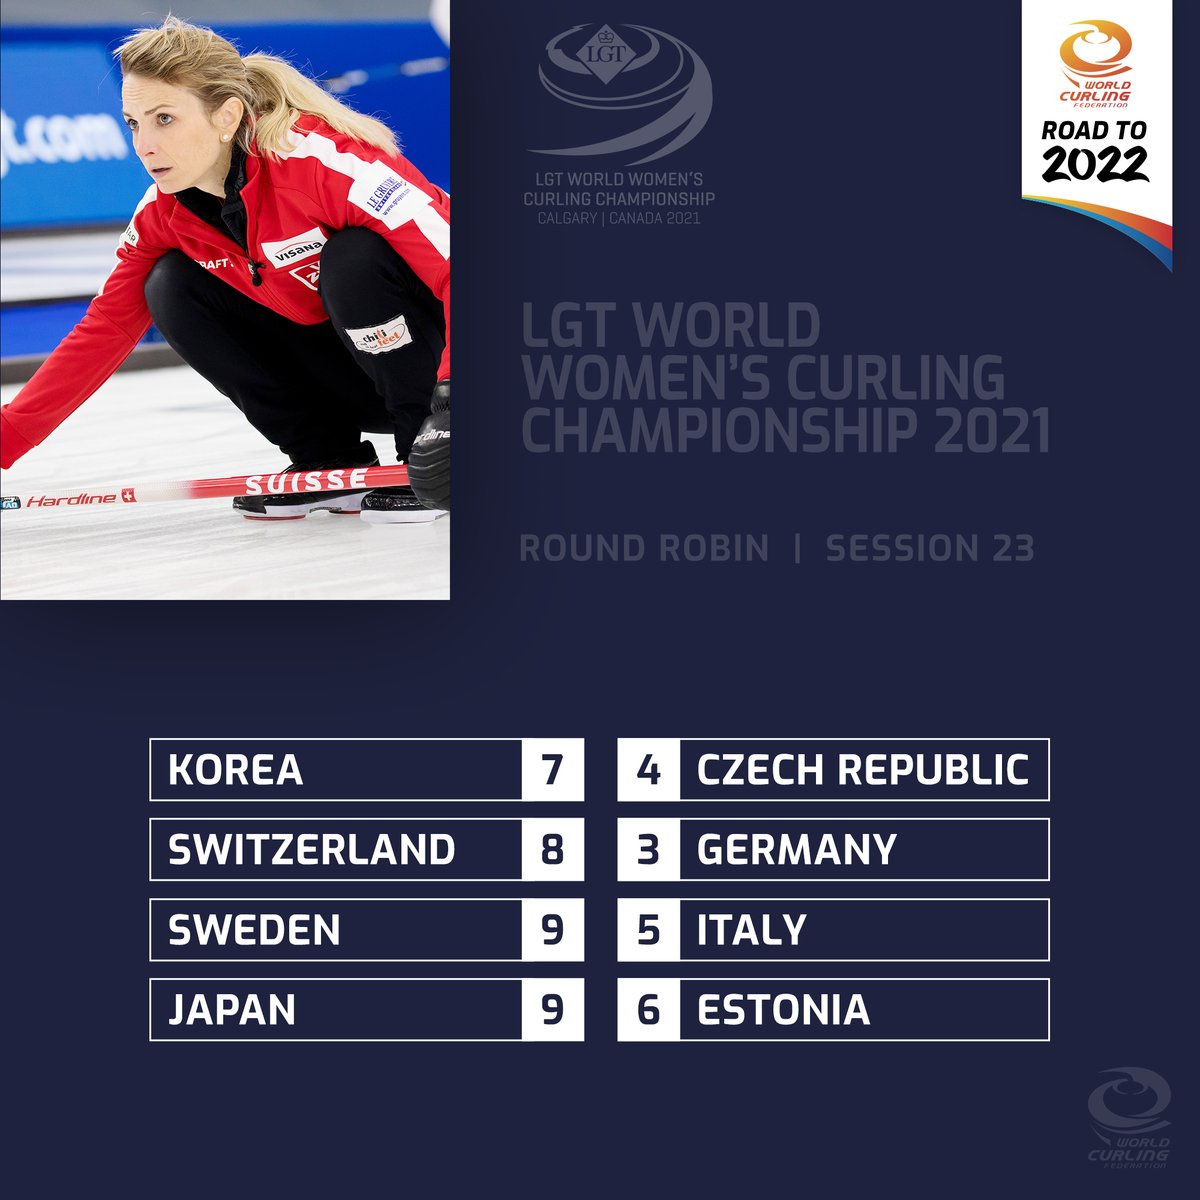 RT @worldcurling: Winners of this afternoon's round-robin session! #WWCC2021 #Roadto2022 https://t.co/YrW2u5IJhO